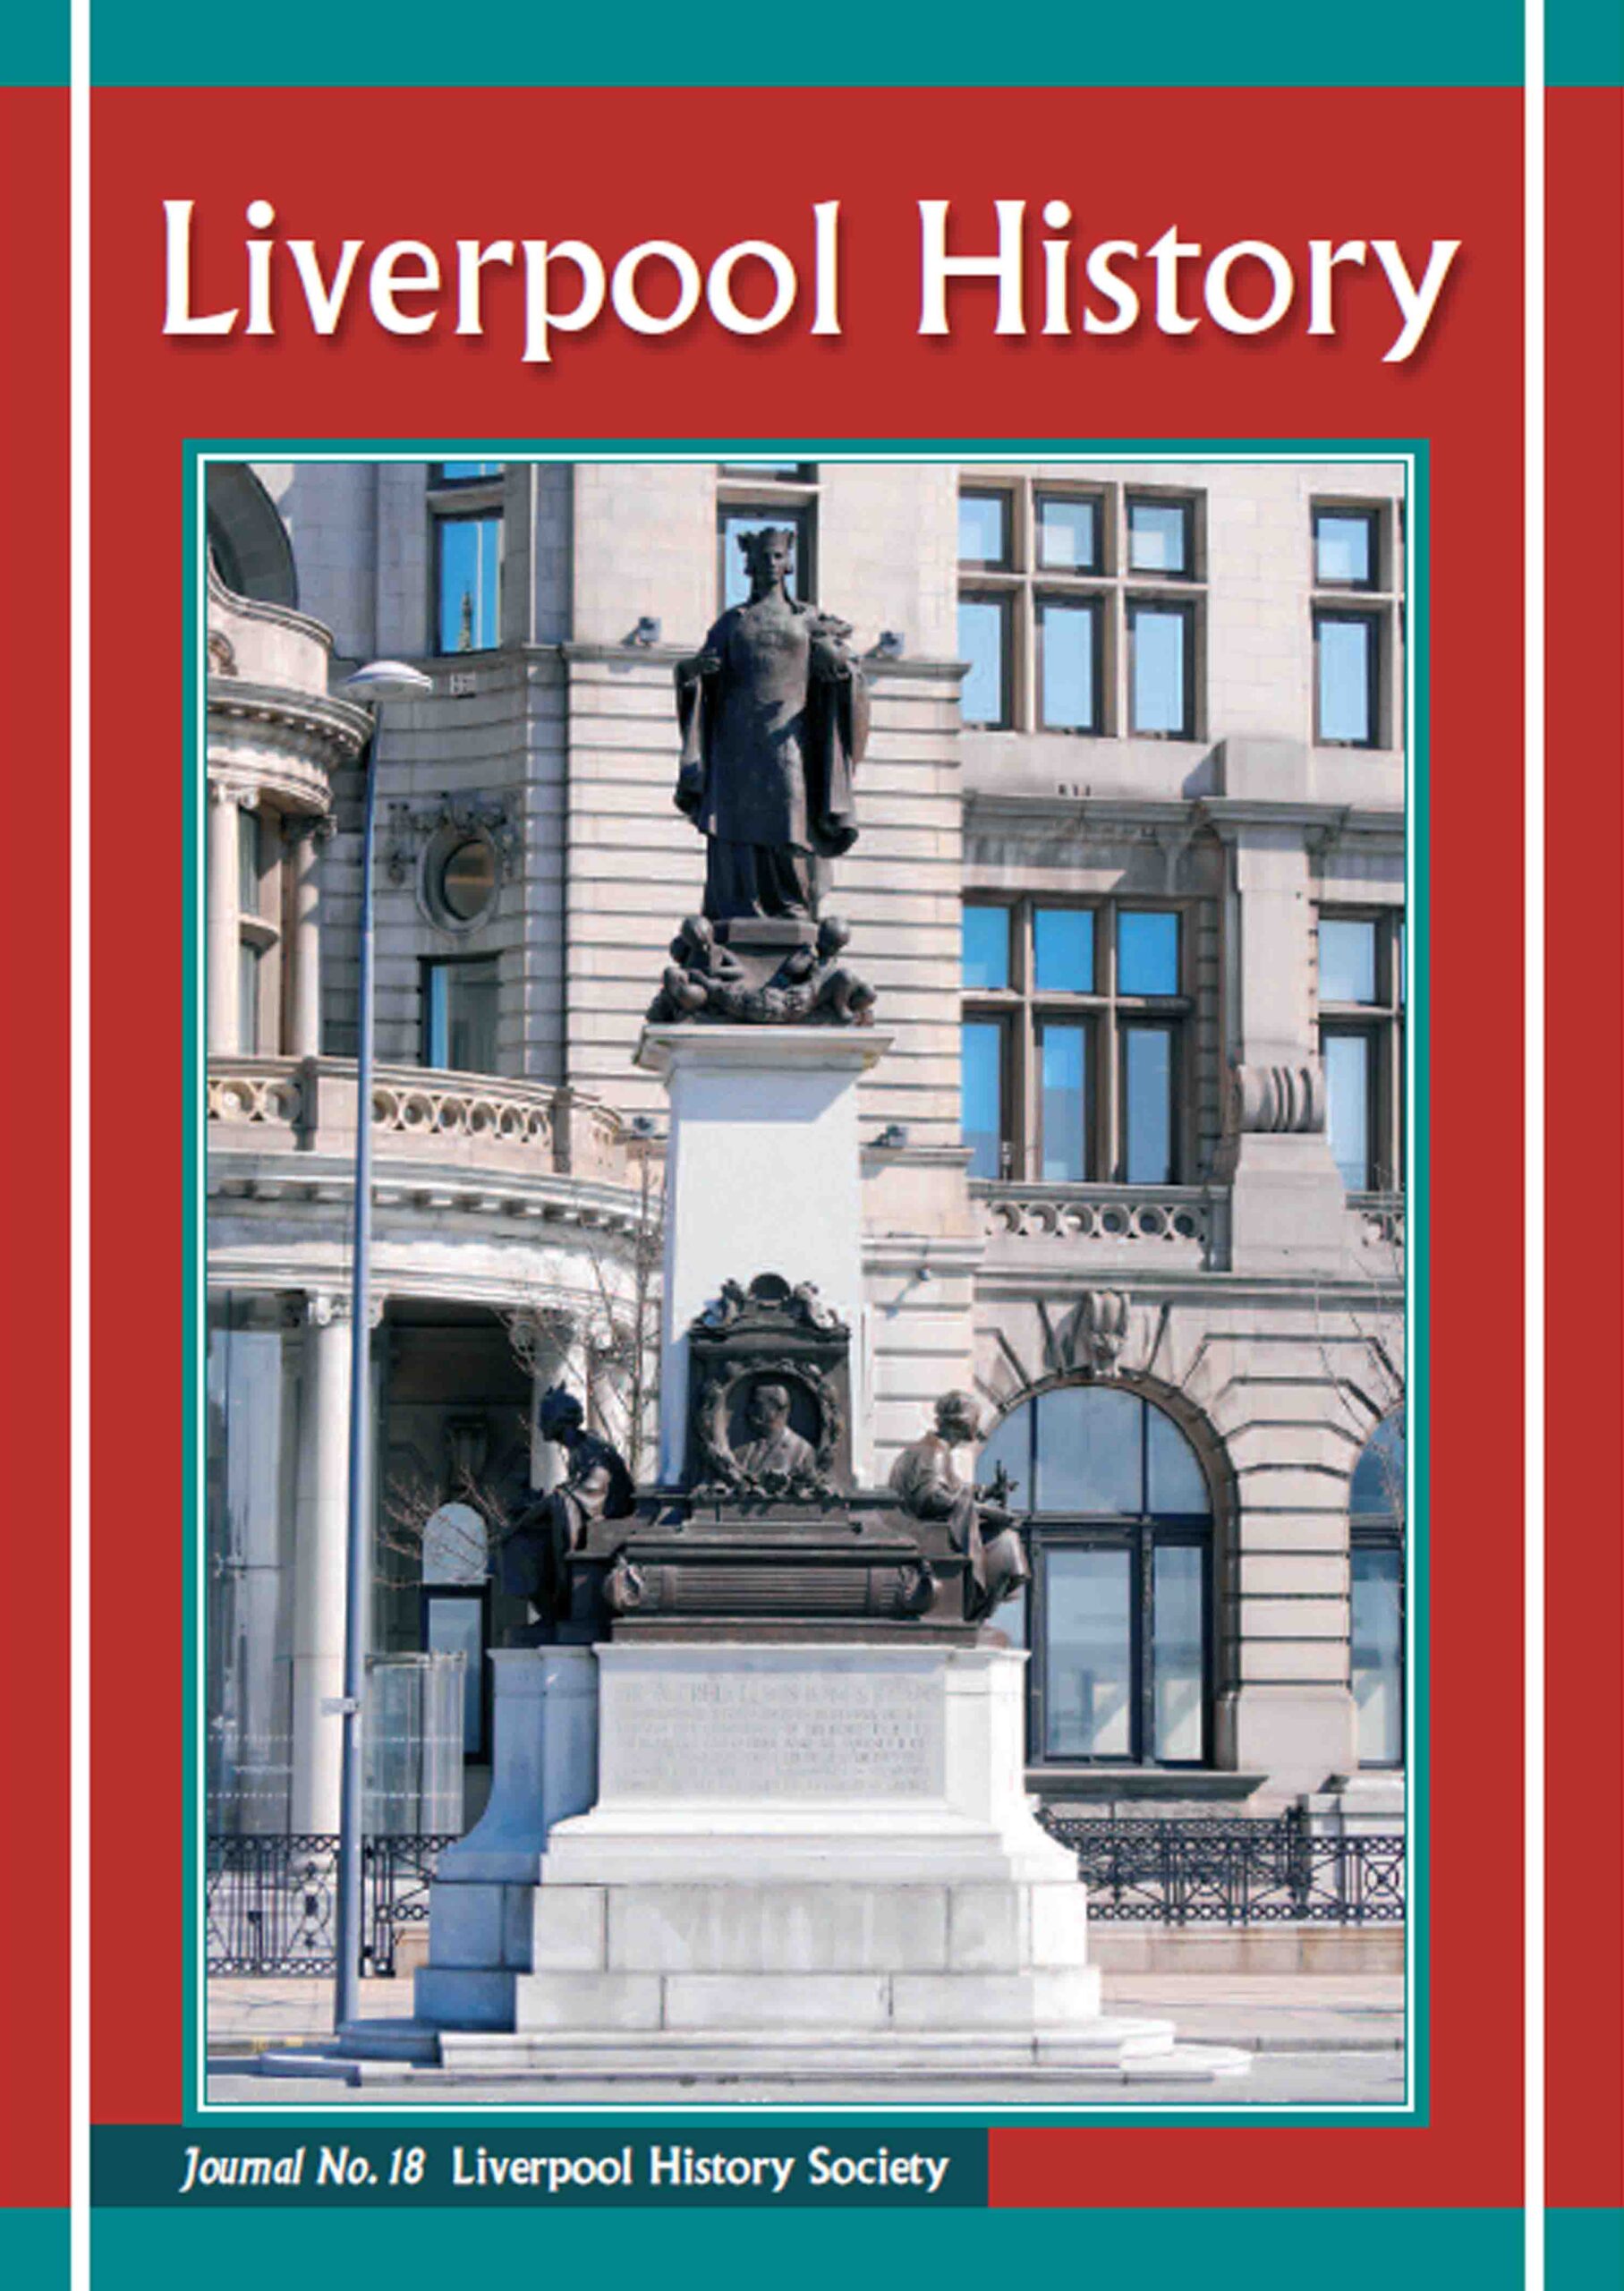 Liverpool History Journal 18 (2019)